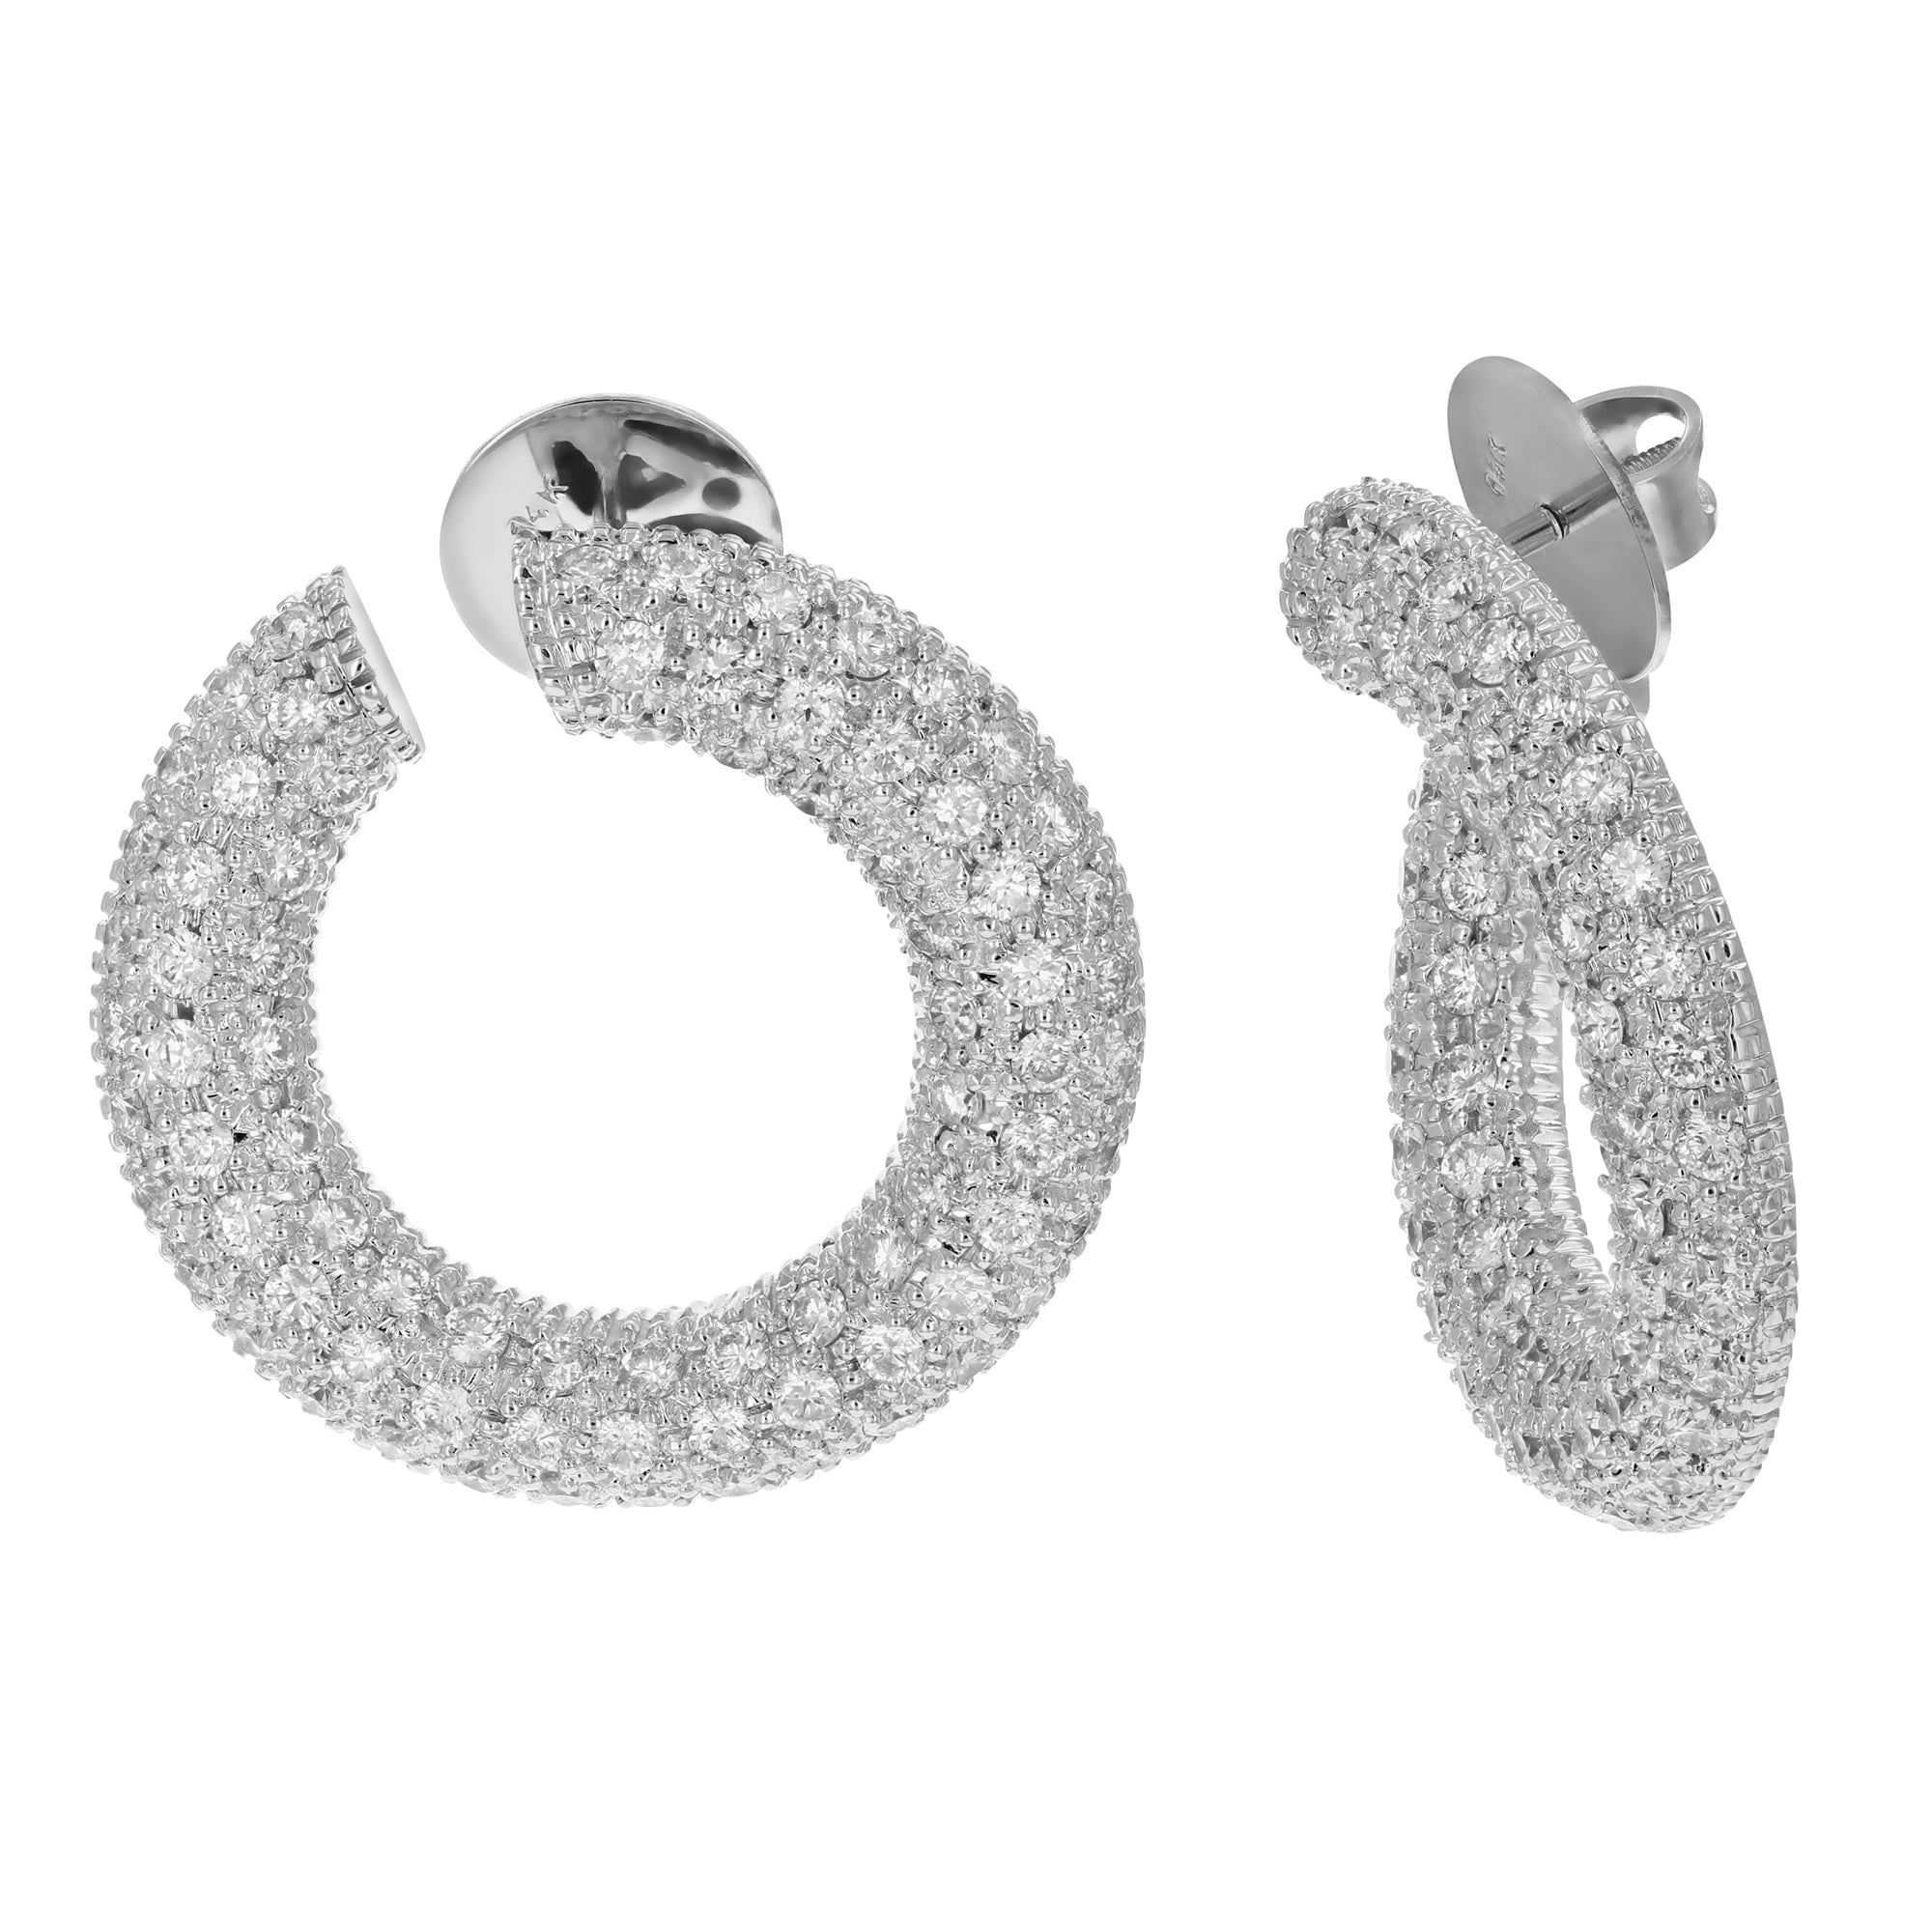 4 cttw SI2-I1 Certified 160 Diamond Hoop Earrings 14K White Gold G-H Color 1 Inch